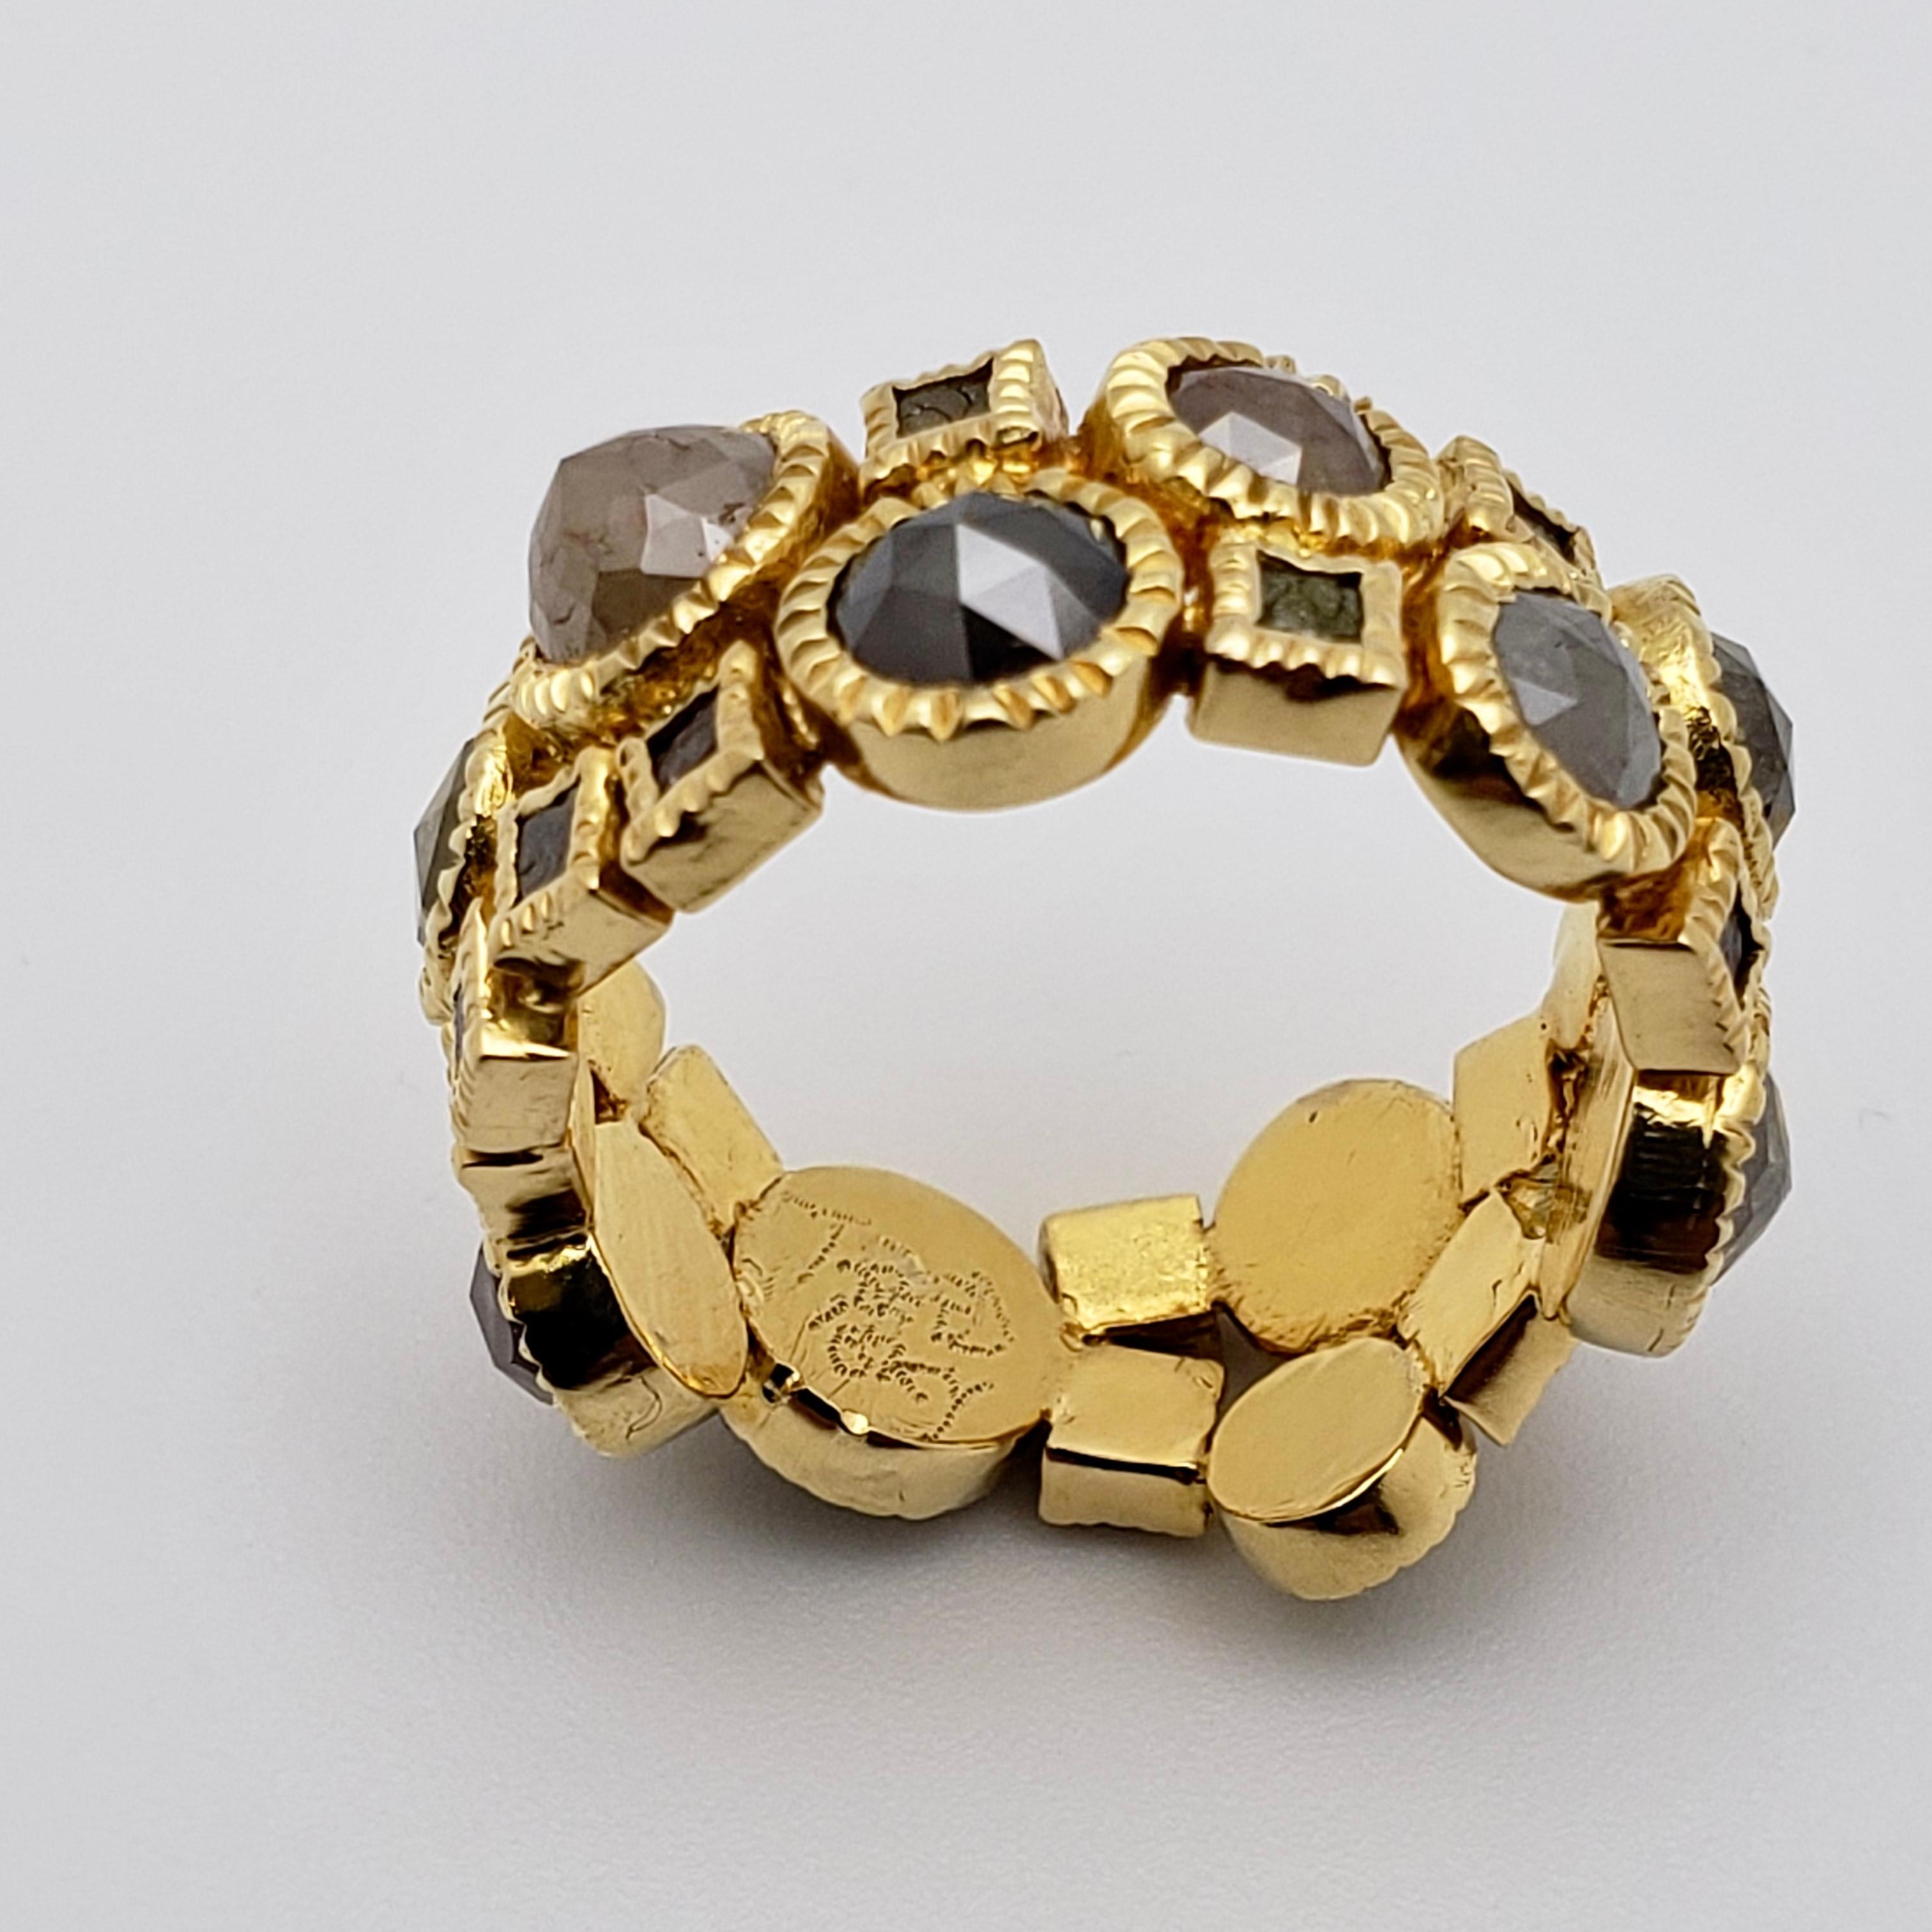 An original 18K yellow gold diamond eternity band. Mounted with numerous natural Roughcut color diamonds, signed Todd Reed. Mounted with 11 dome-faceted round shaped natural colored diamonds (grayish, pinkish, greenish, ect.) and 15 smaller rough